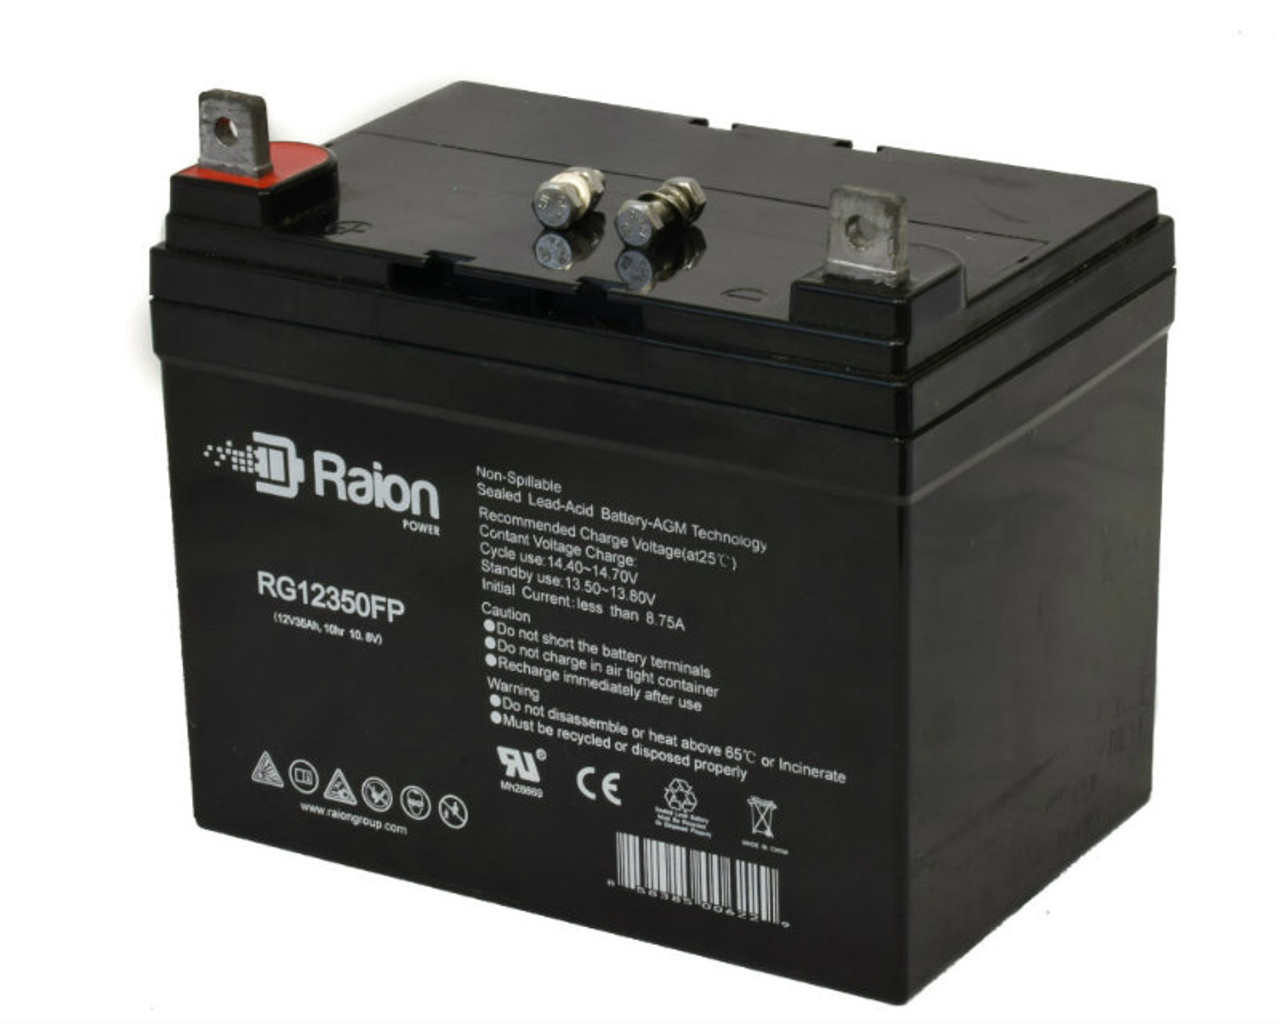 Raion Power Replacement 12V 35Ah RG12350FP Mobility Scooter Battery for Electric Mobility Rascal 200T INDOOR / OUTDOOR SCOOTER